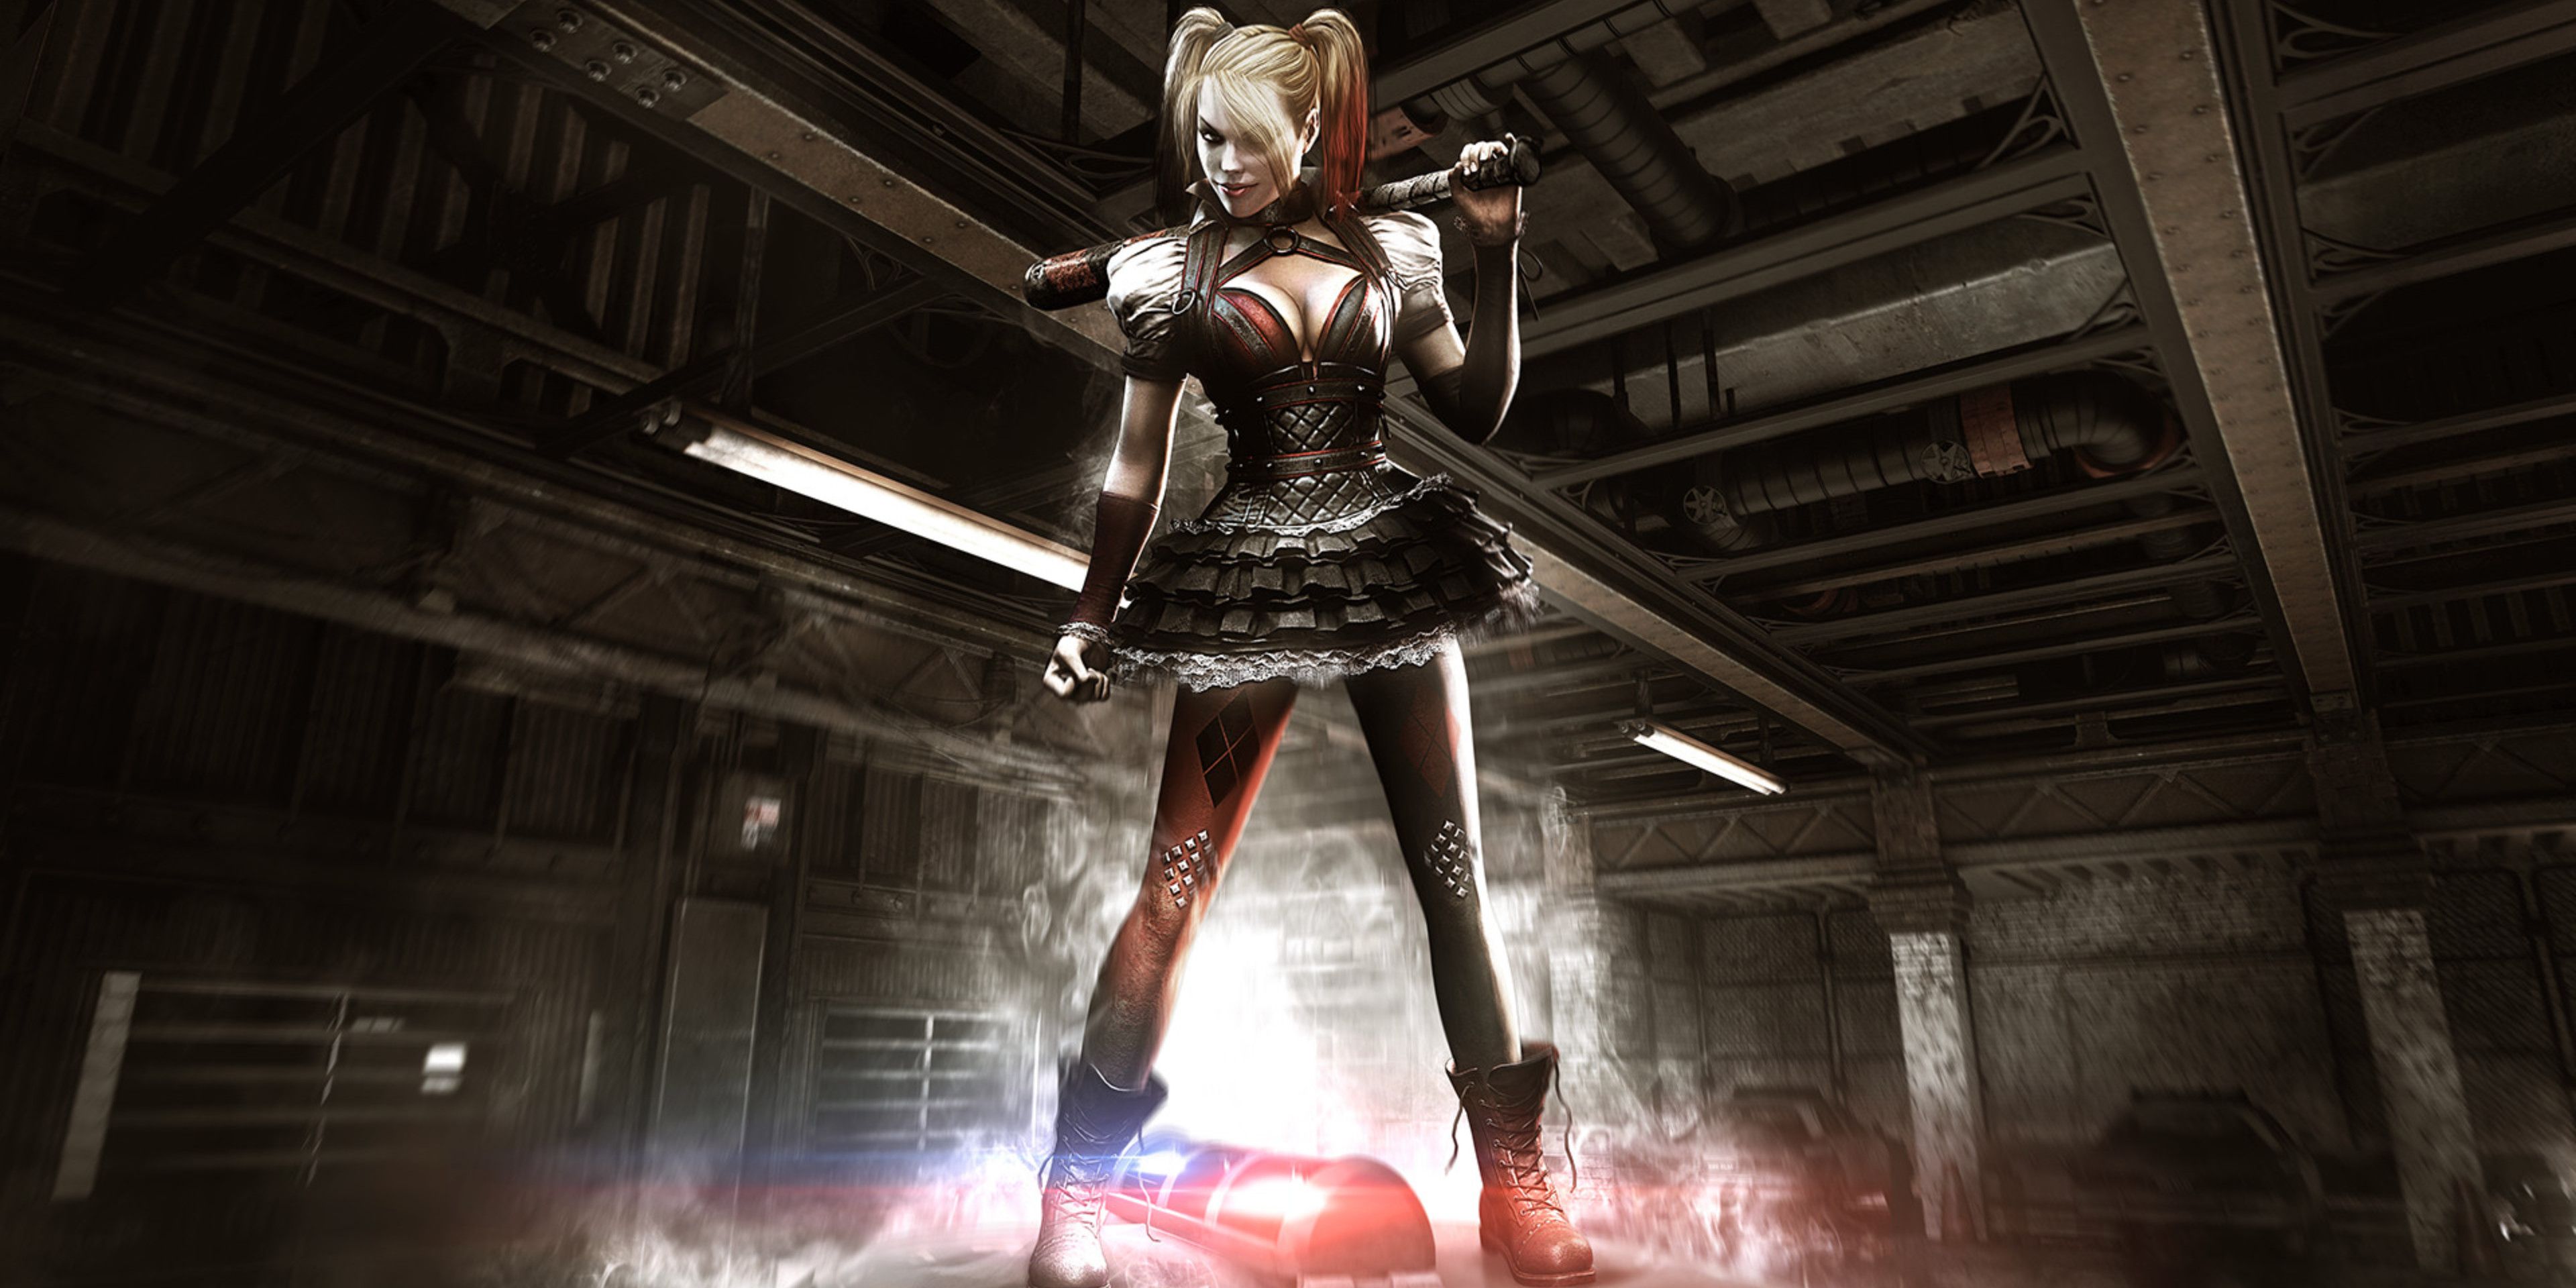 Harley Quinn in her Arkham Knight outfit stands on the roof of a police car with a bat in hand